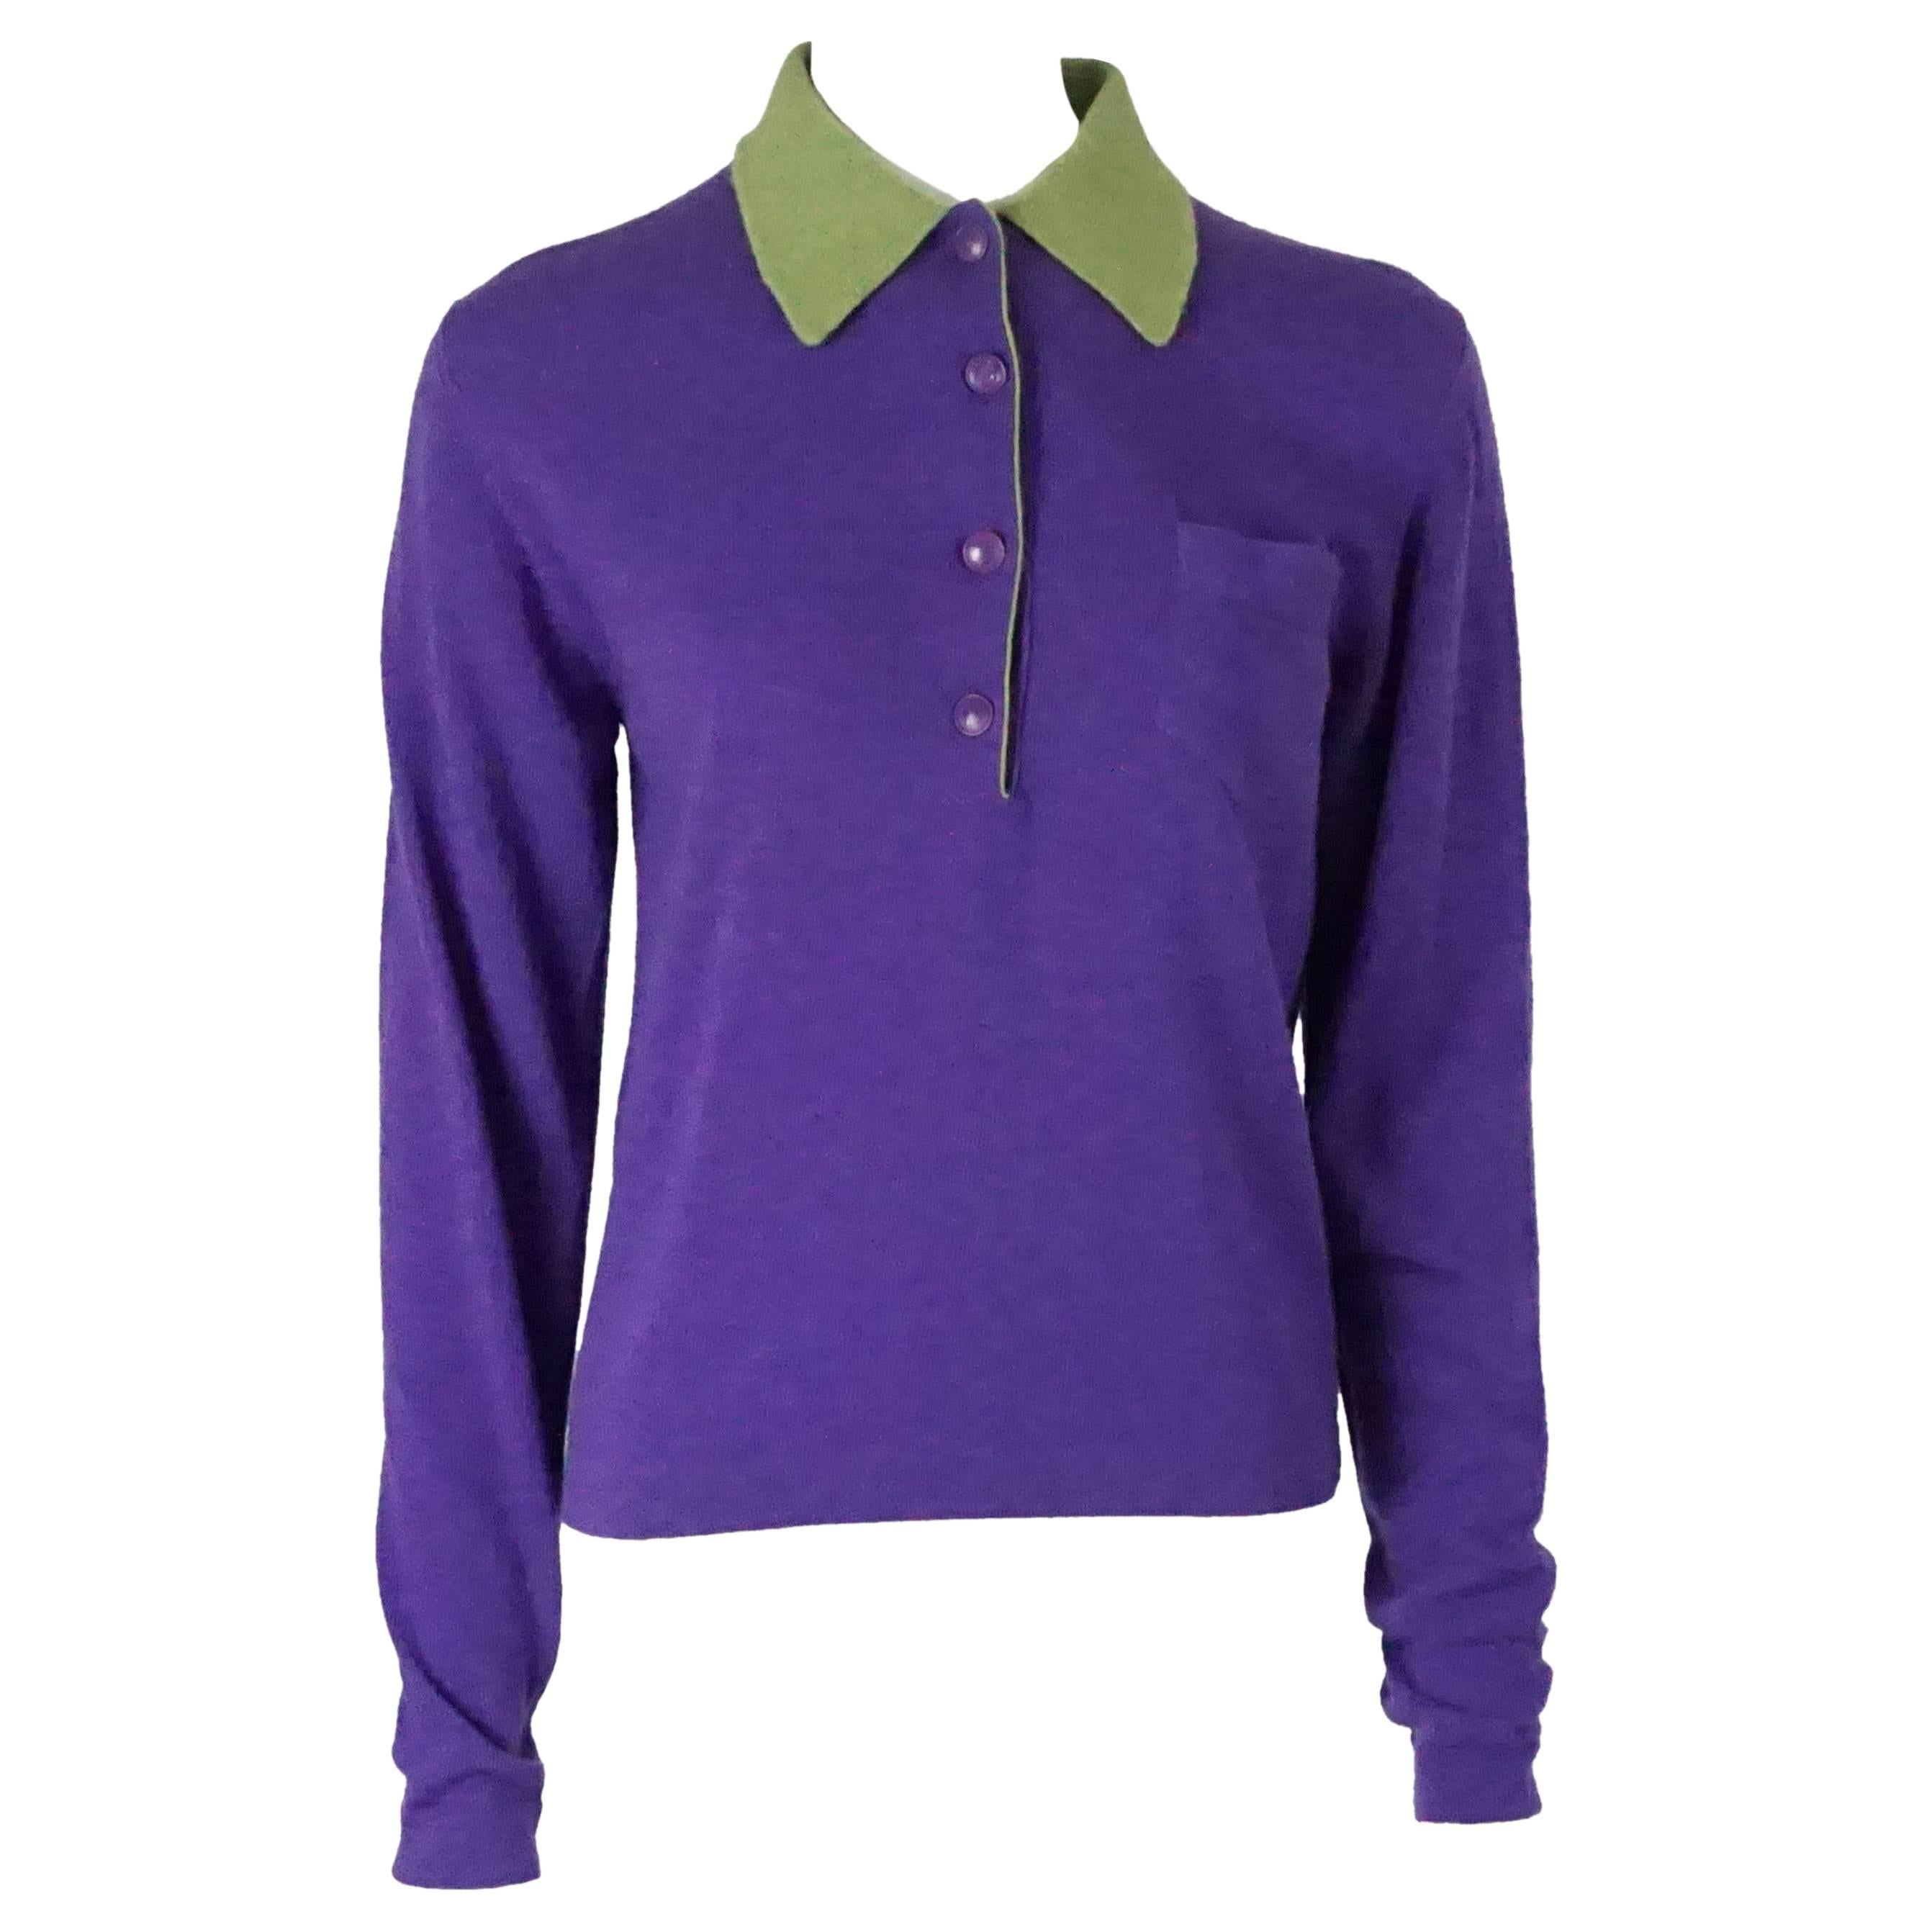 Hermes Vintage Purple Cashmere Sweater with Green Collar - L - 1970's